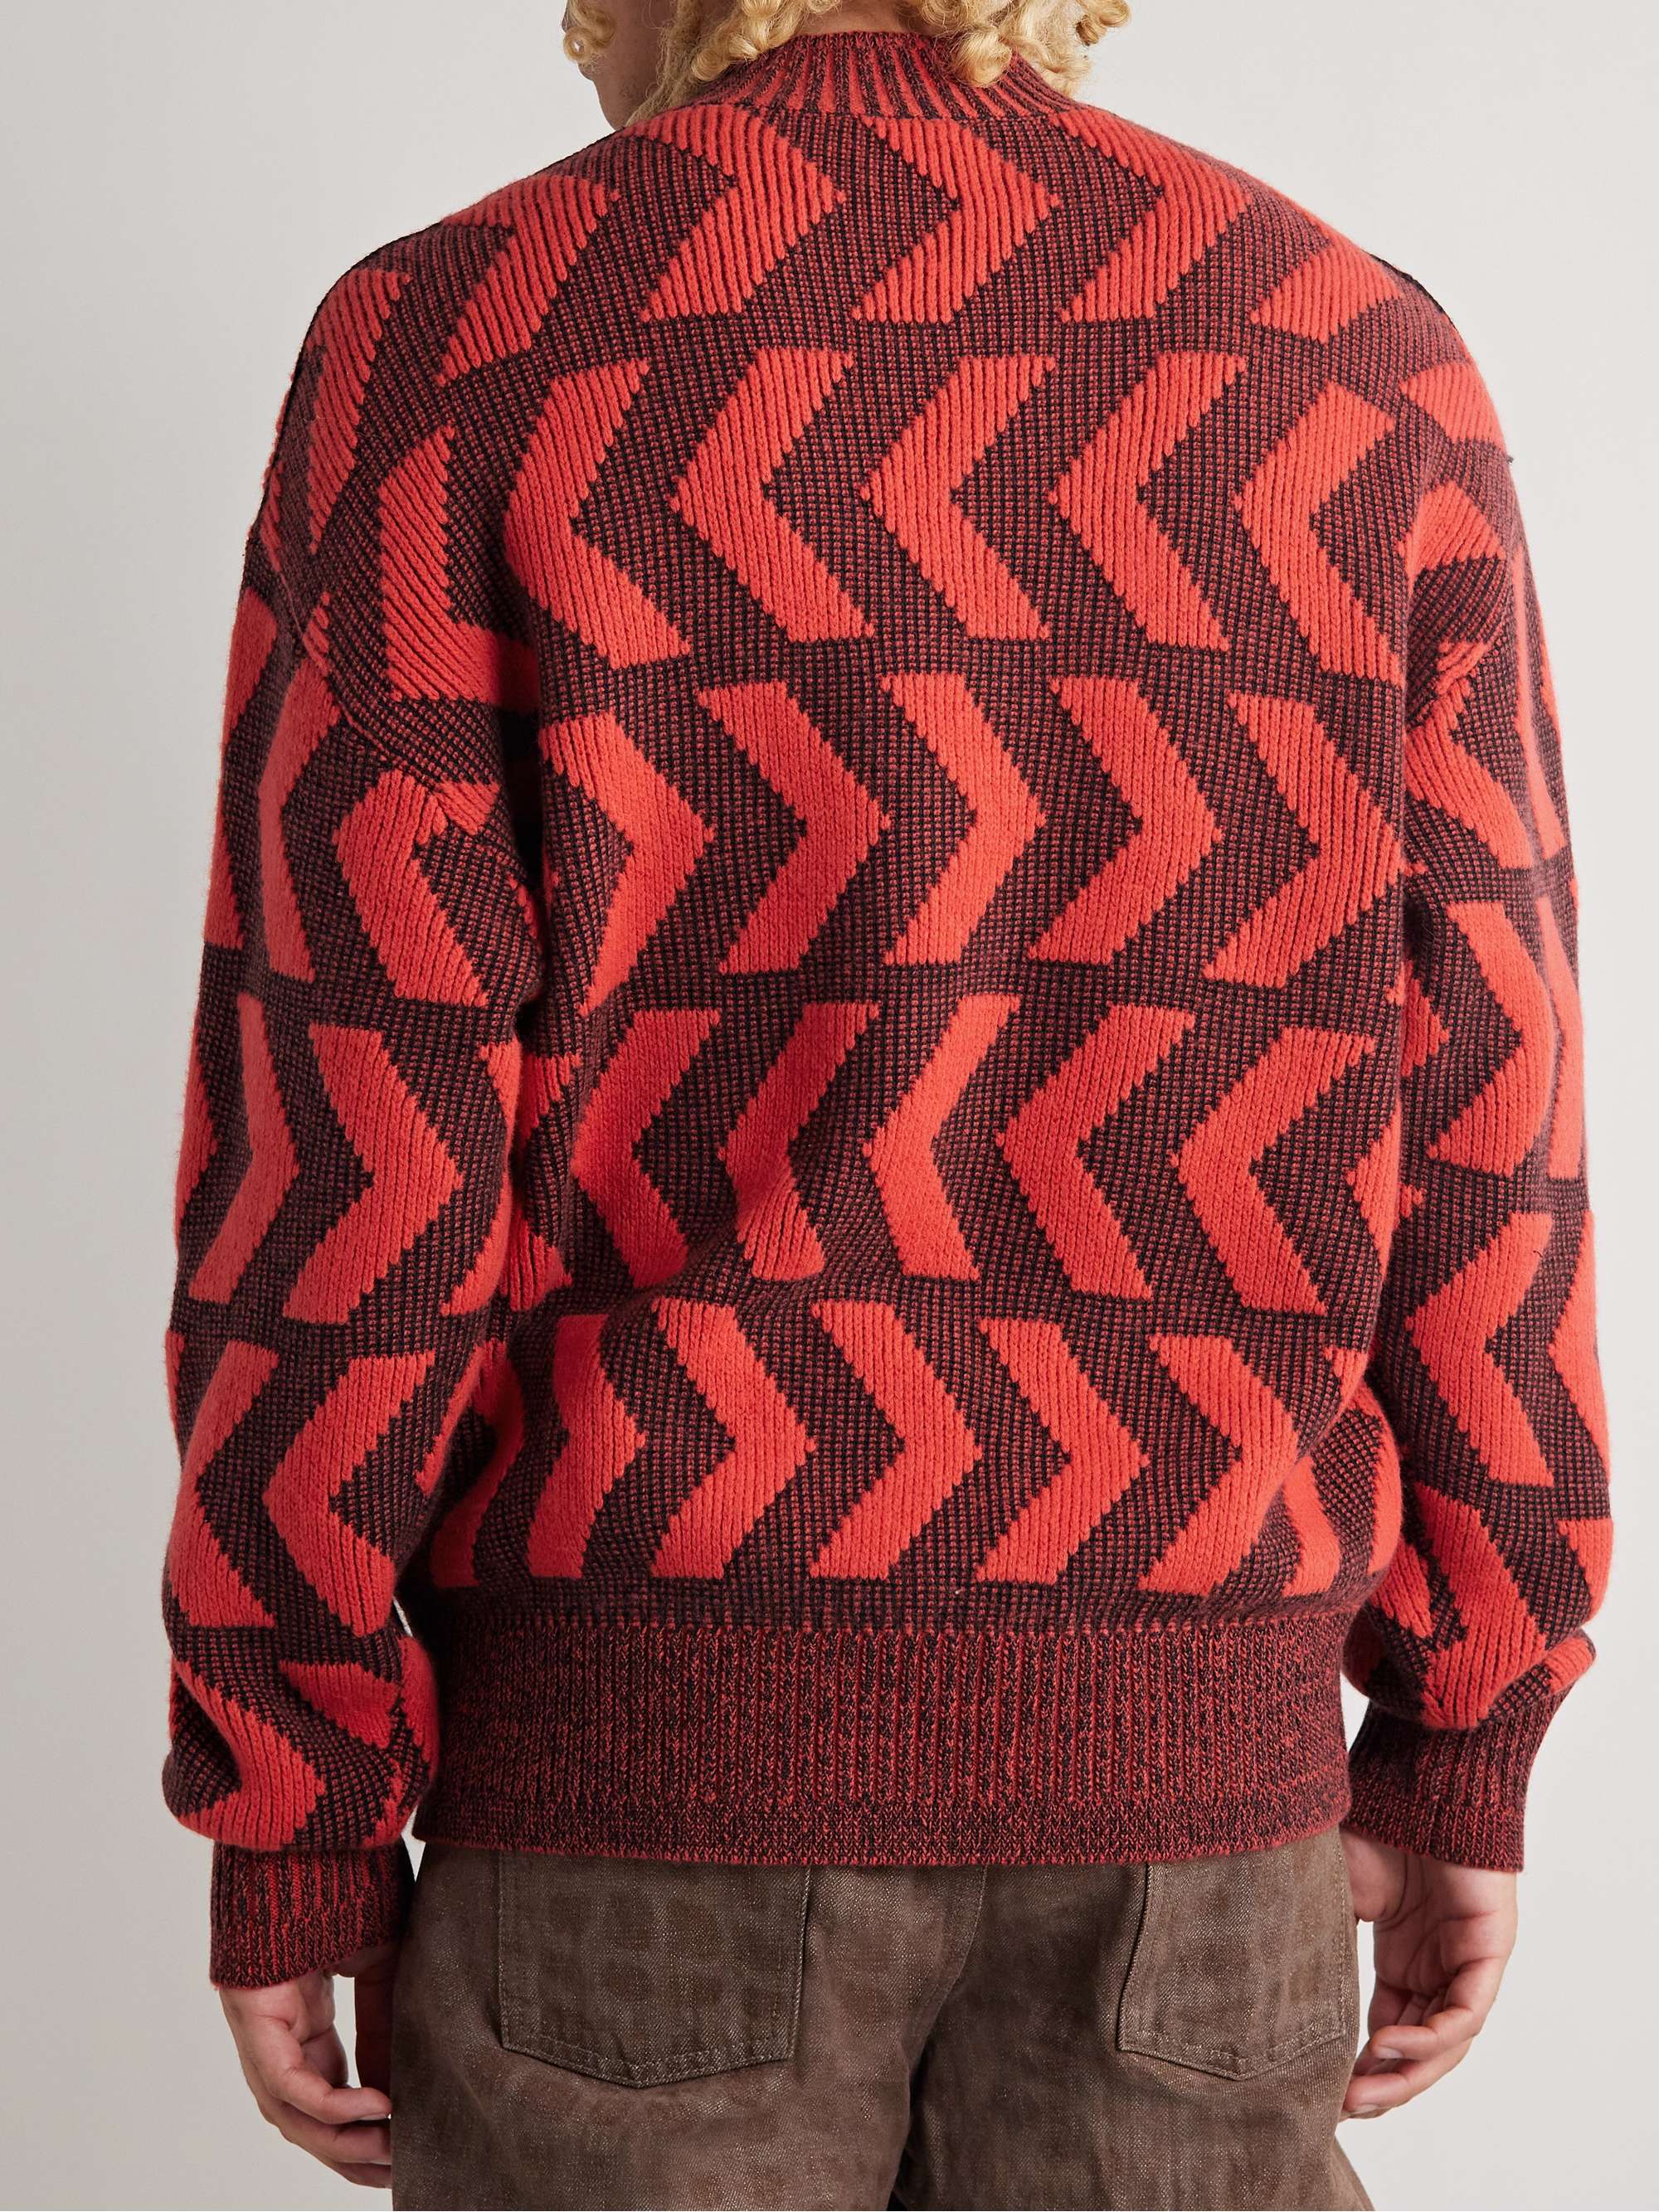 ACNE STUDIOS Intarsia Wool and Cotton-Blend Sweater